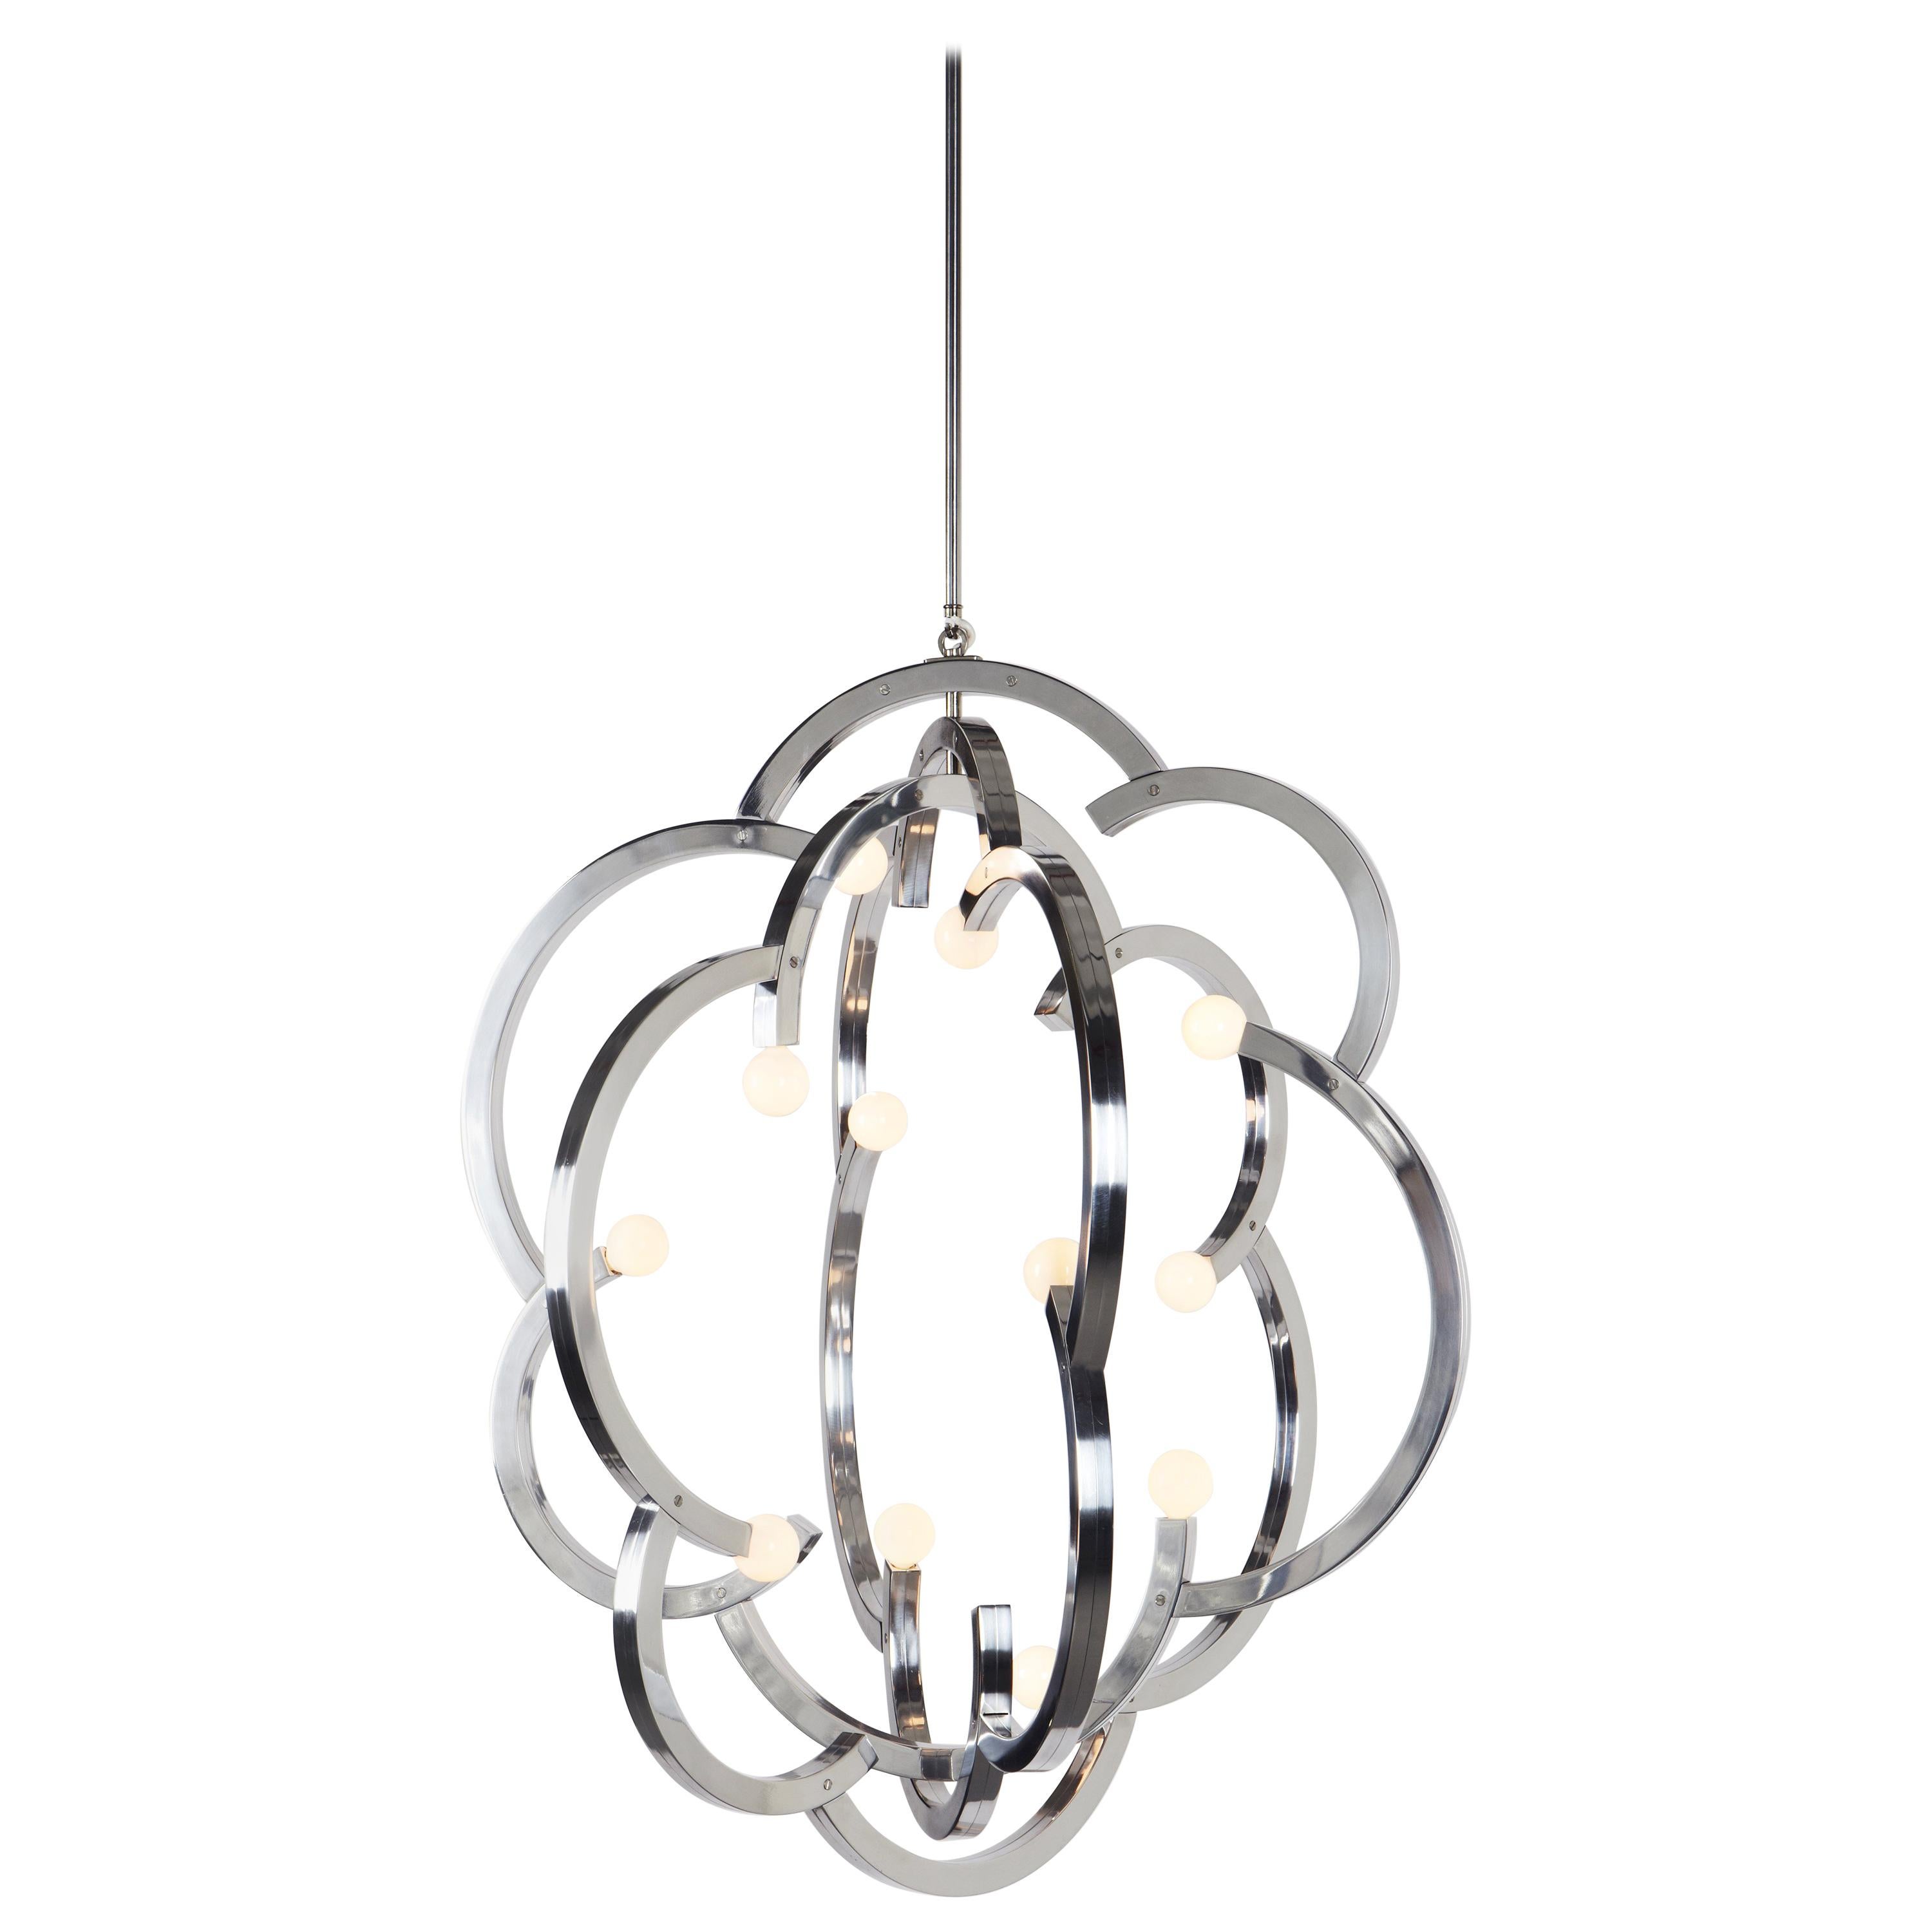 Blow Pendant in Polished Nickel by Lindsey Adelman for Roll & Hill